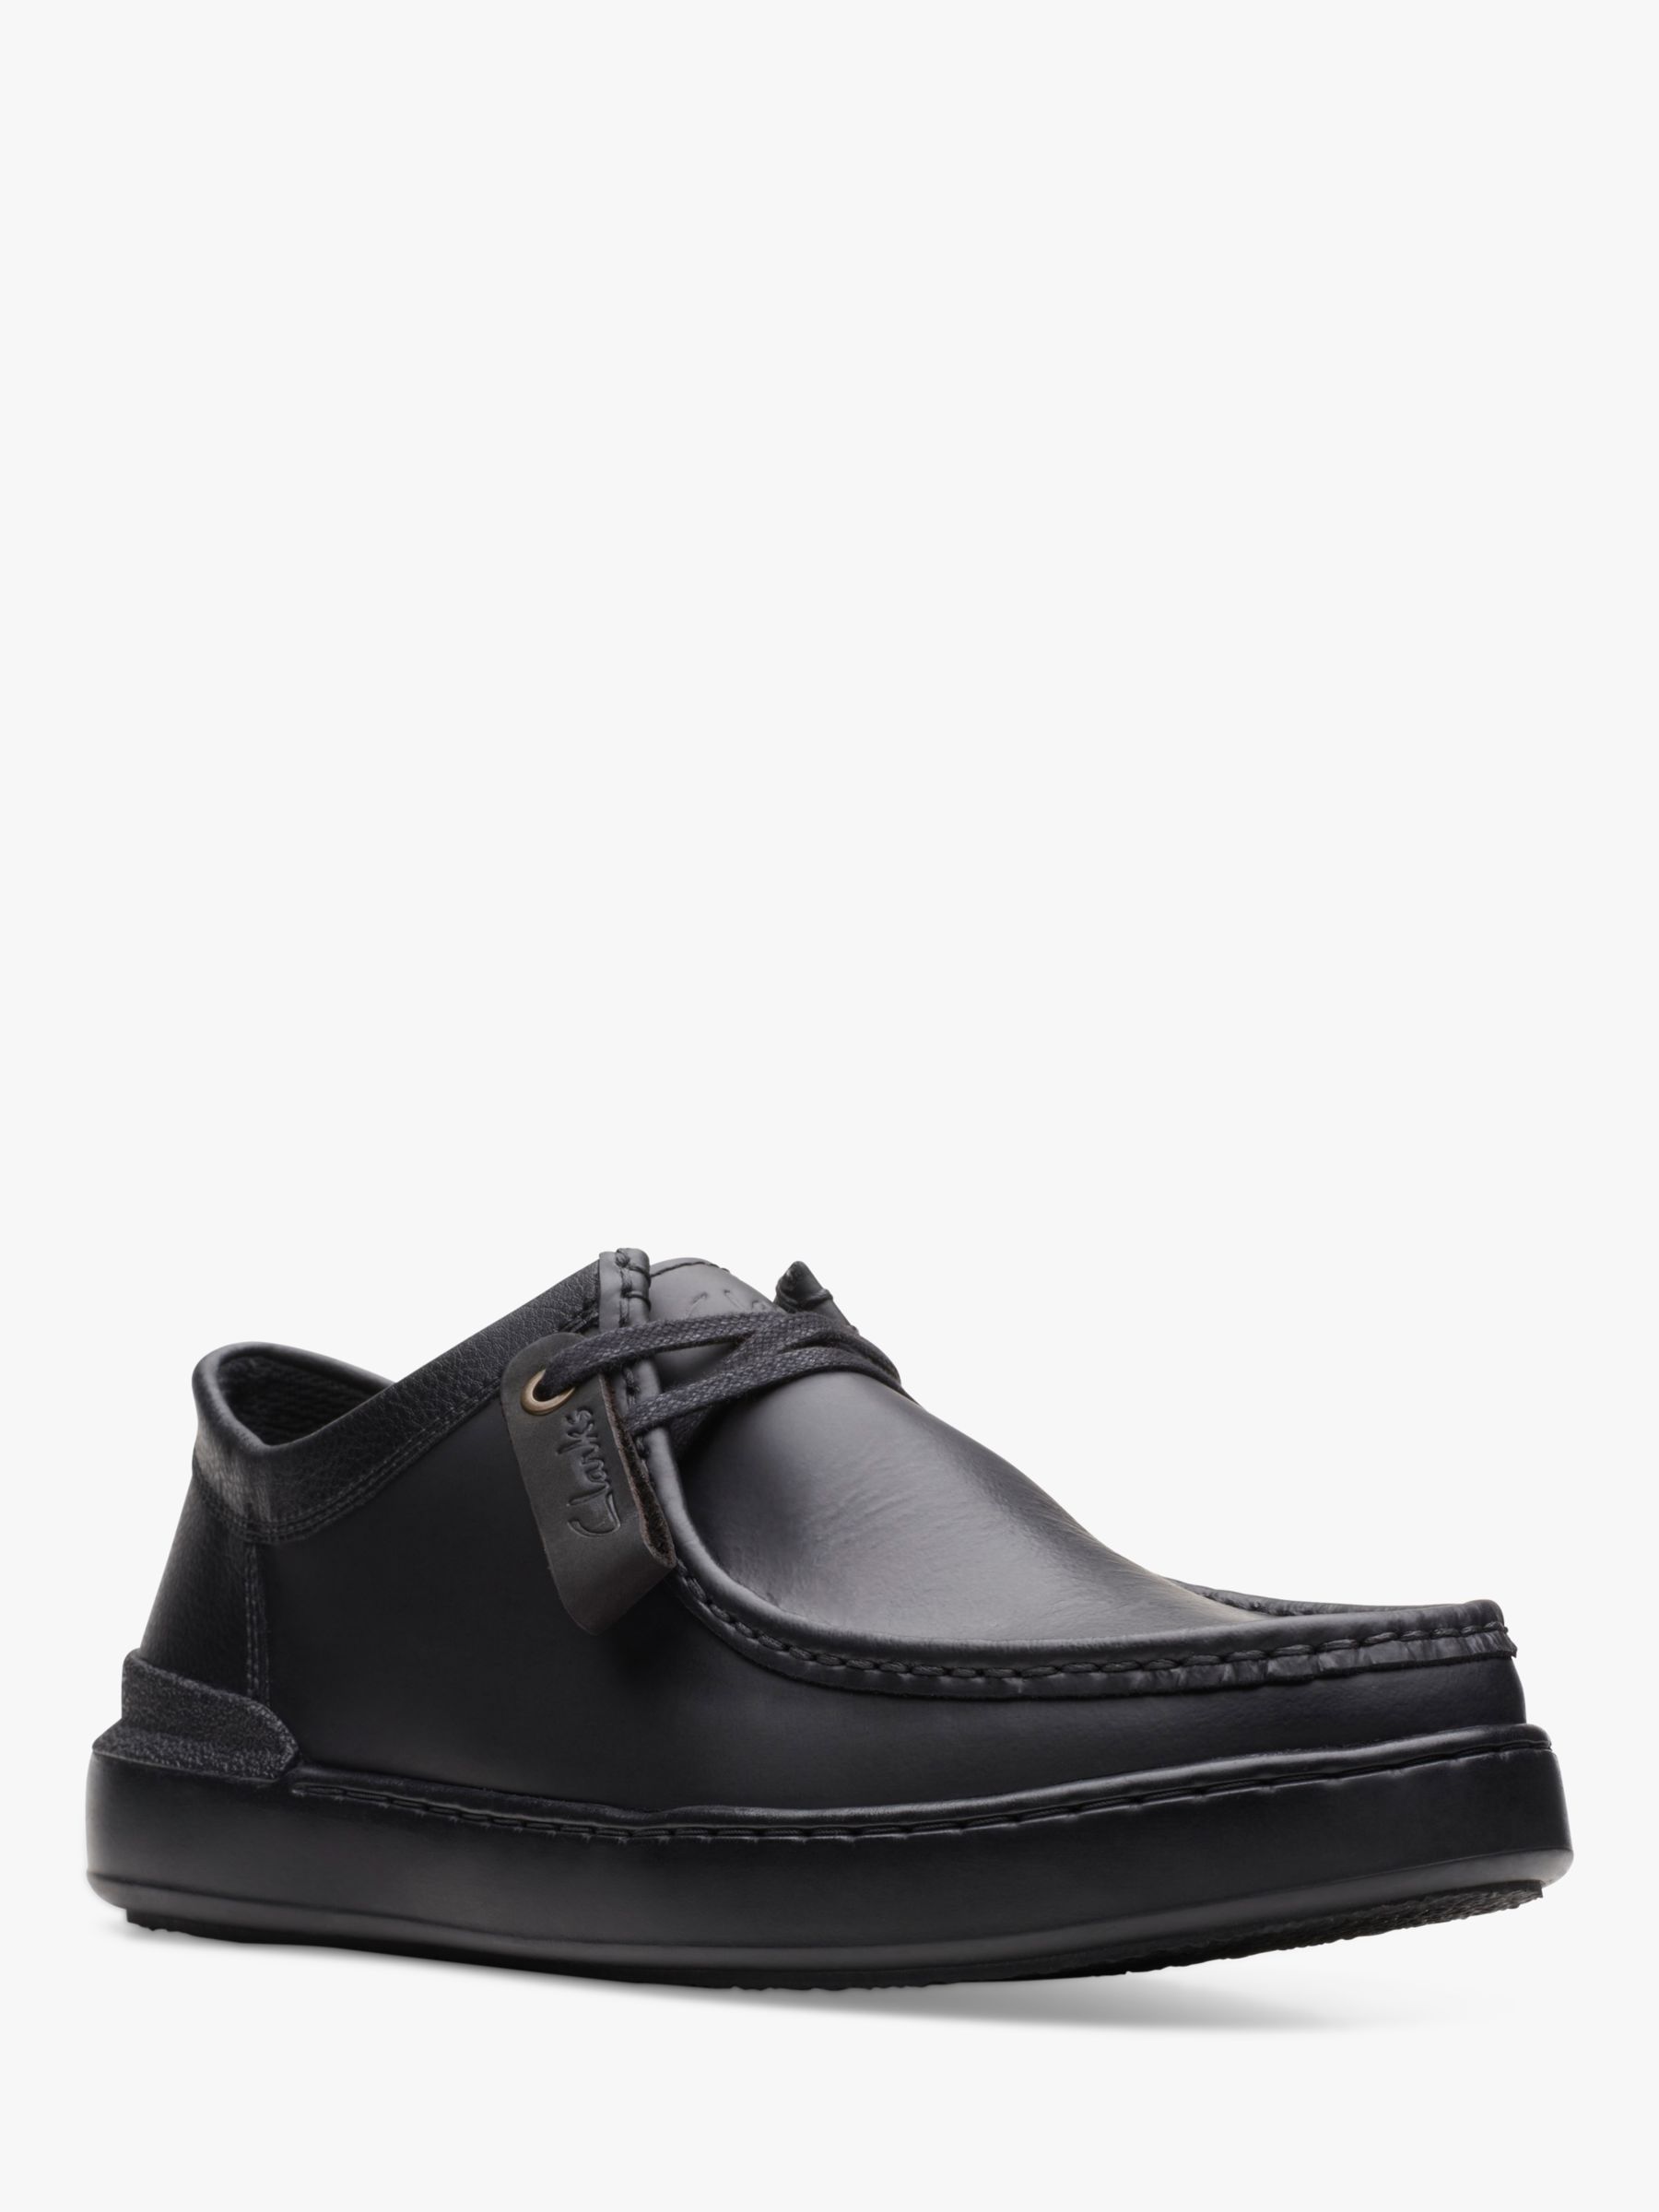 Clarks CourtLite Wally Leather Lace Up Trainers, Black at John Lewis ...